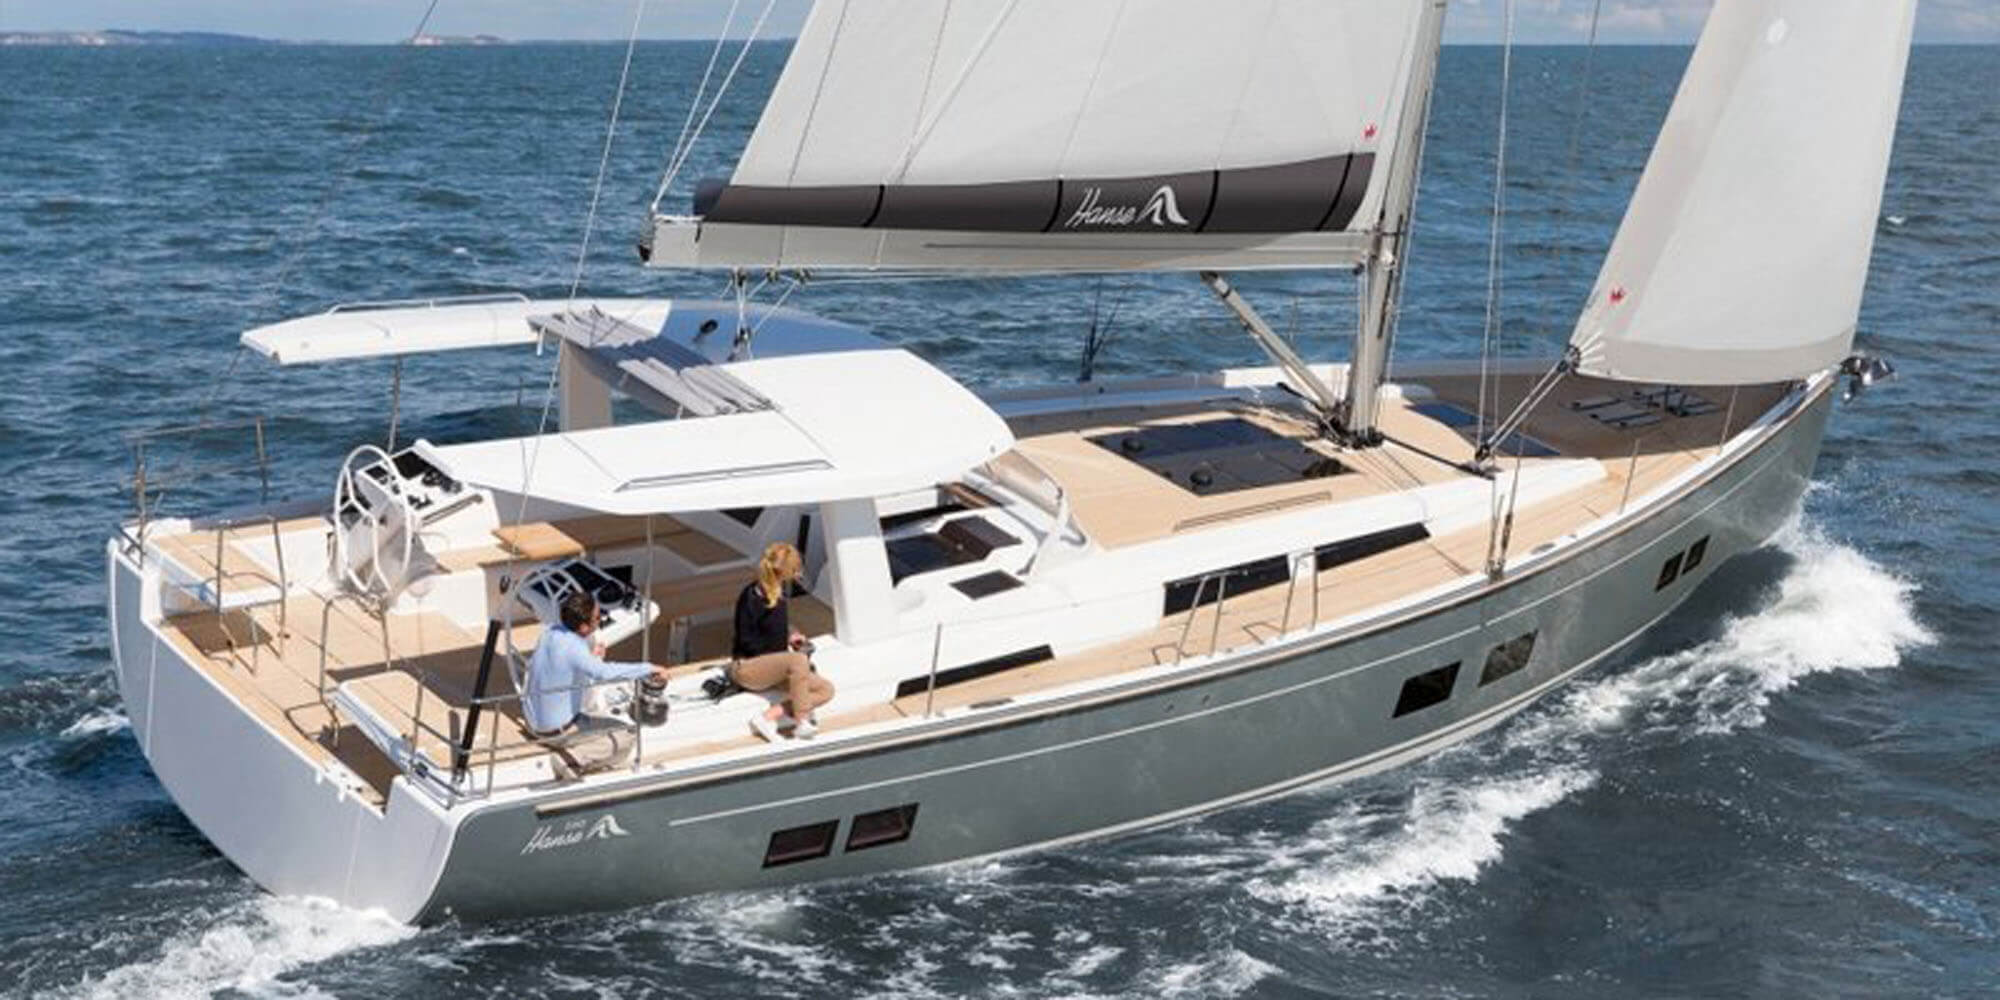 Sail boat FOR CHARTER, year 2019 brand Hanse and model 588, available in Marina Lavrion  Attiki Grecia